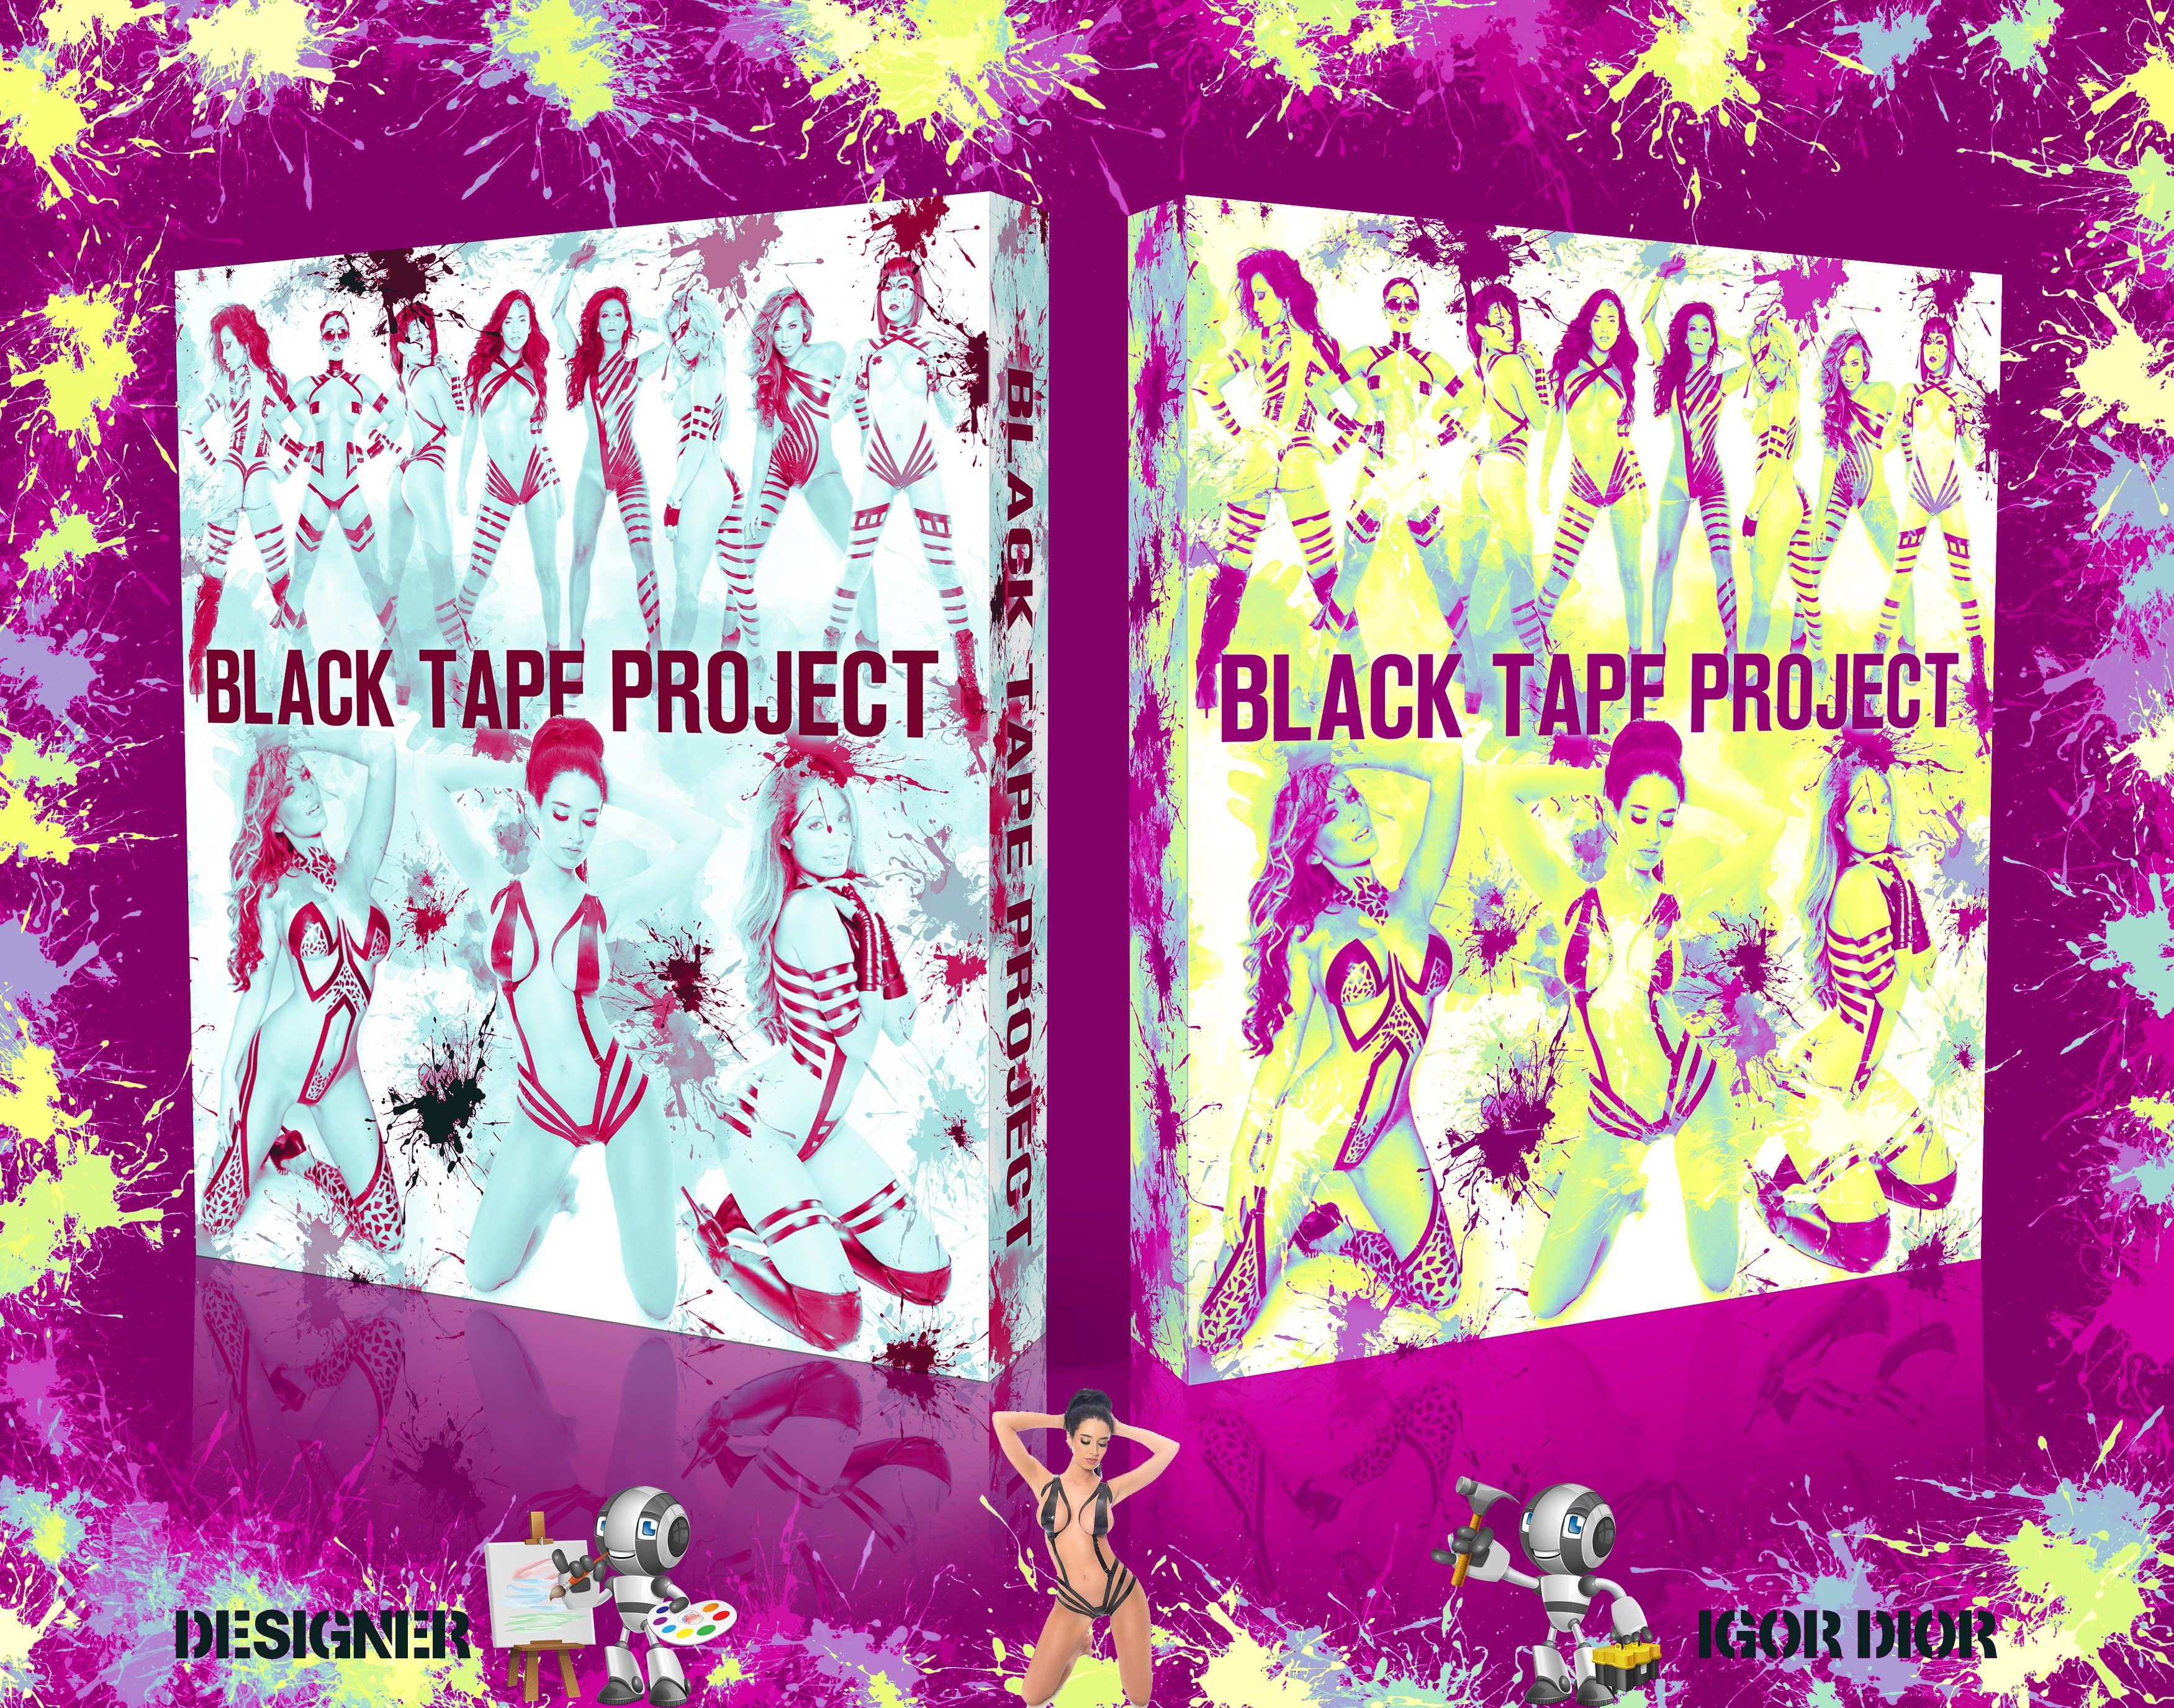 The Black Tape Project box cover